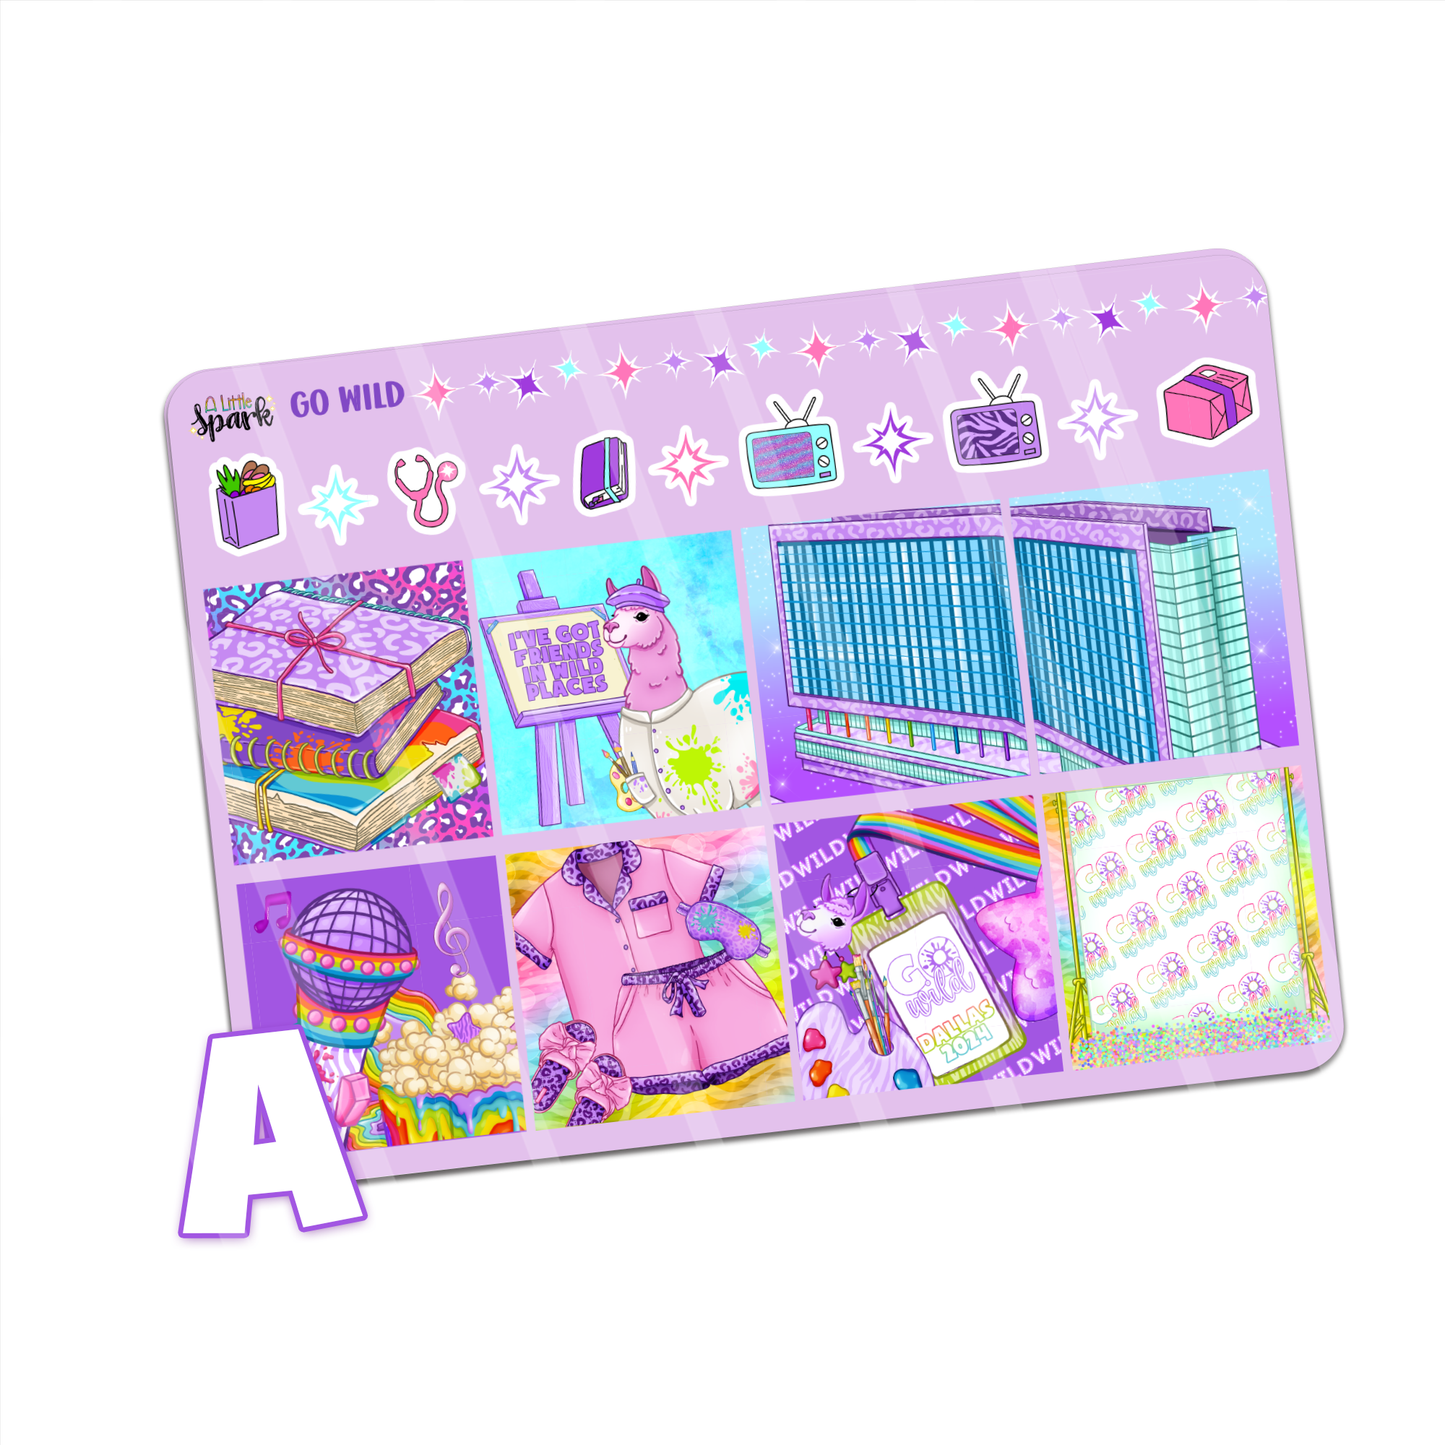 (A) Painted Wild Sticker Kit